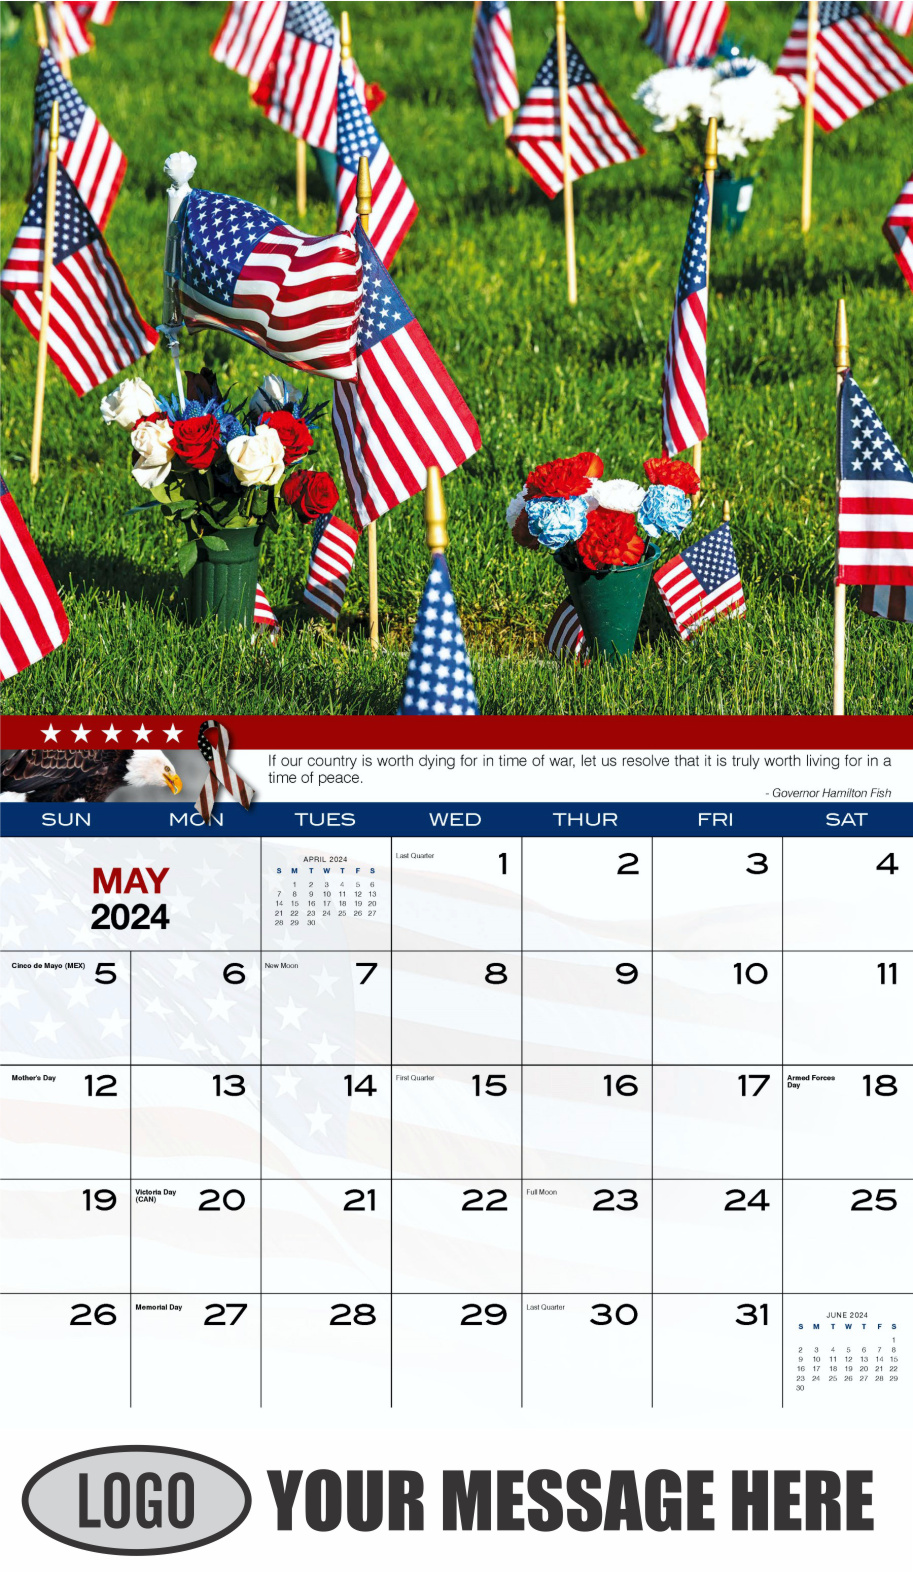 Home of the Brave 2024 USA Armed Forces Business Promo Calendar - May